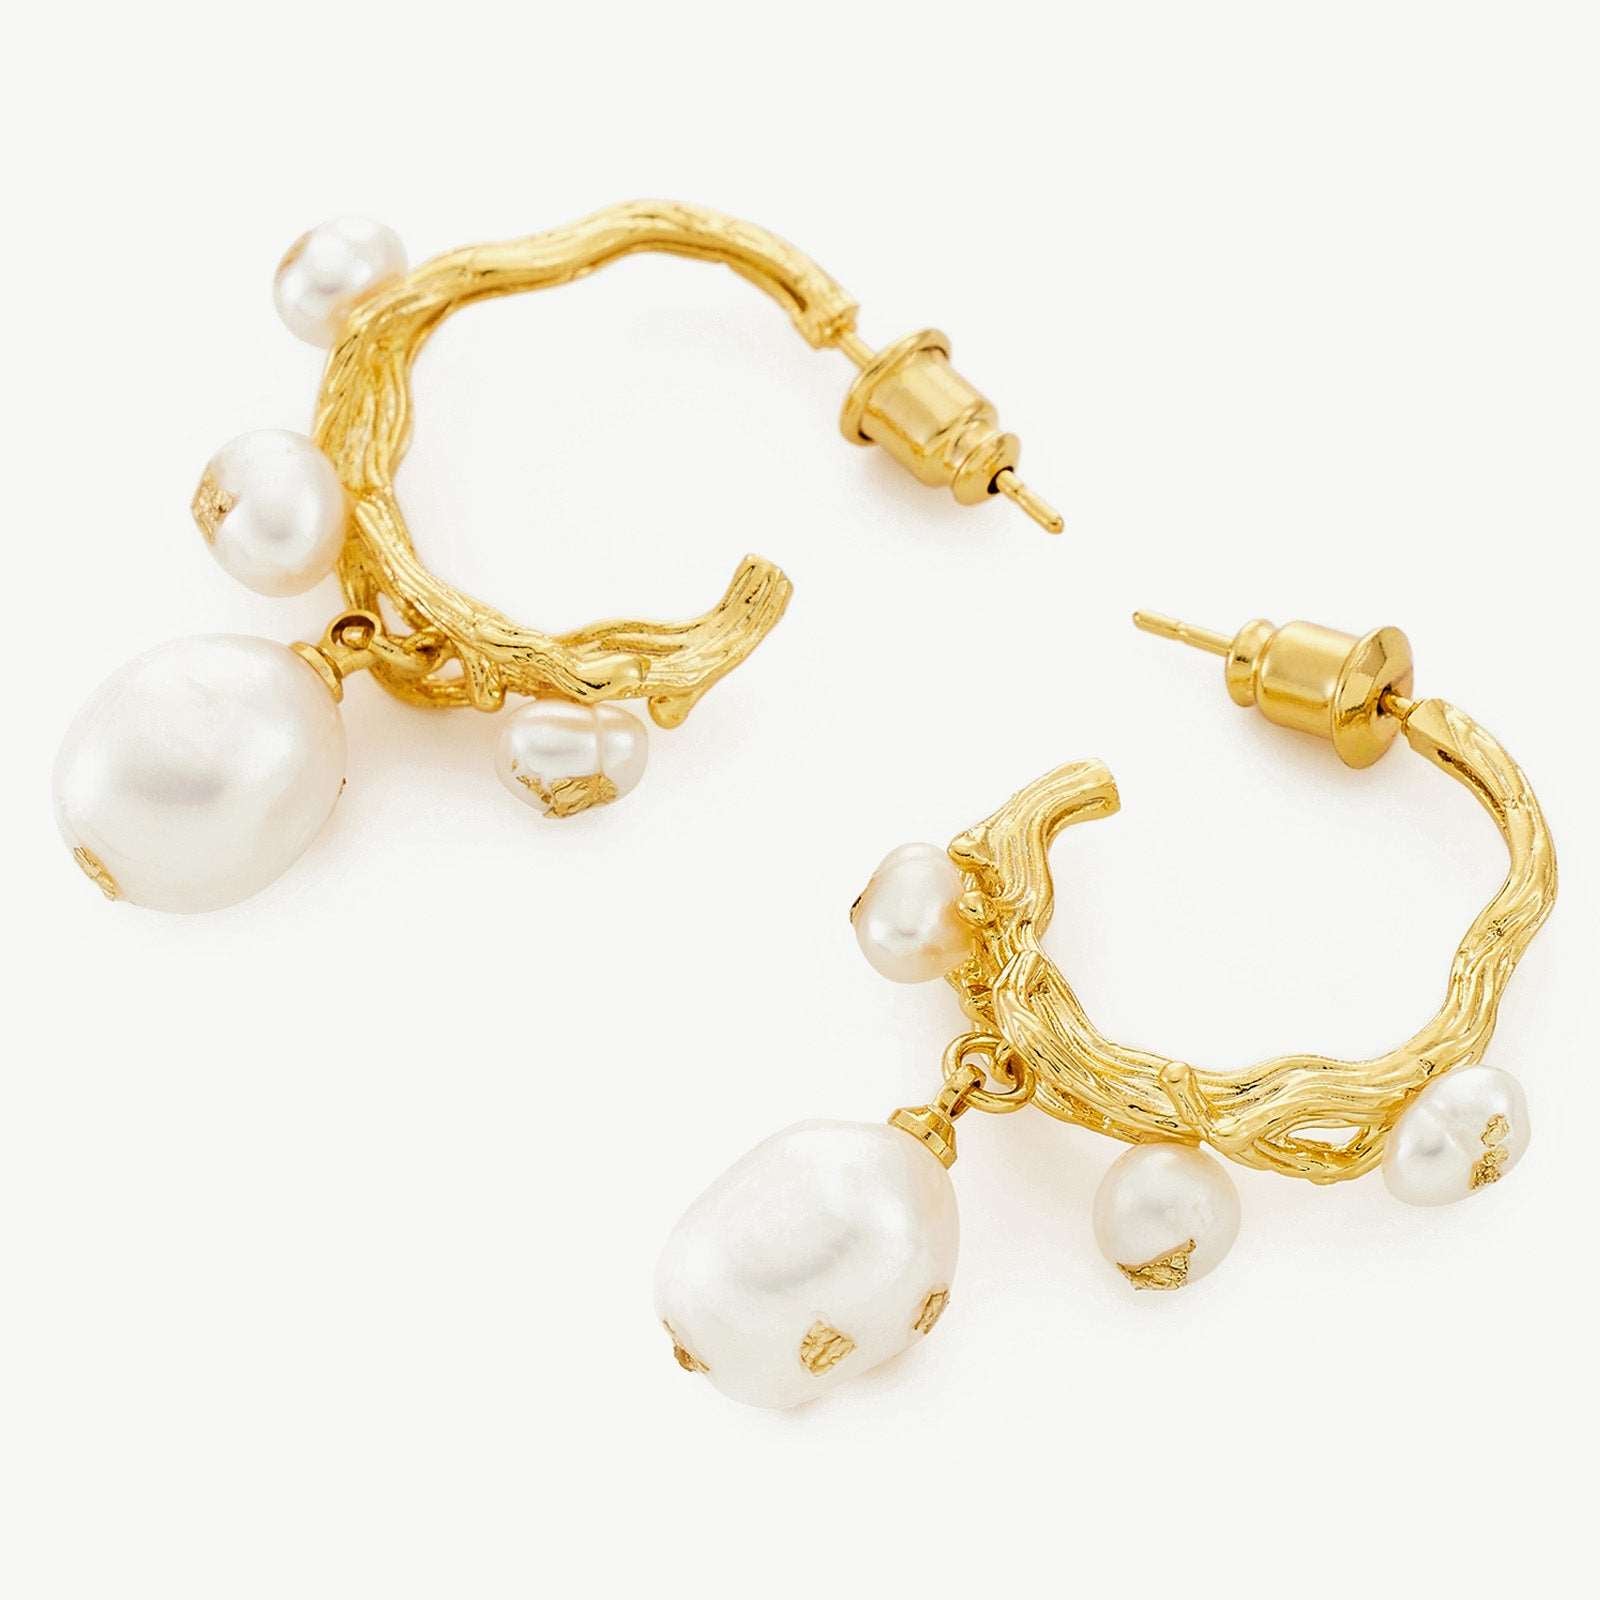 Baroque Pearl Drop Earrings, sculpted to perfection, these earrings highlight the unique and organic shapes of baroque pearls for a distinctive and artistic look.